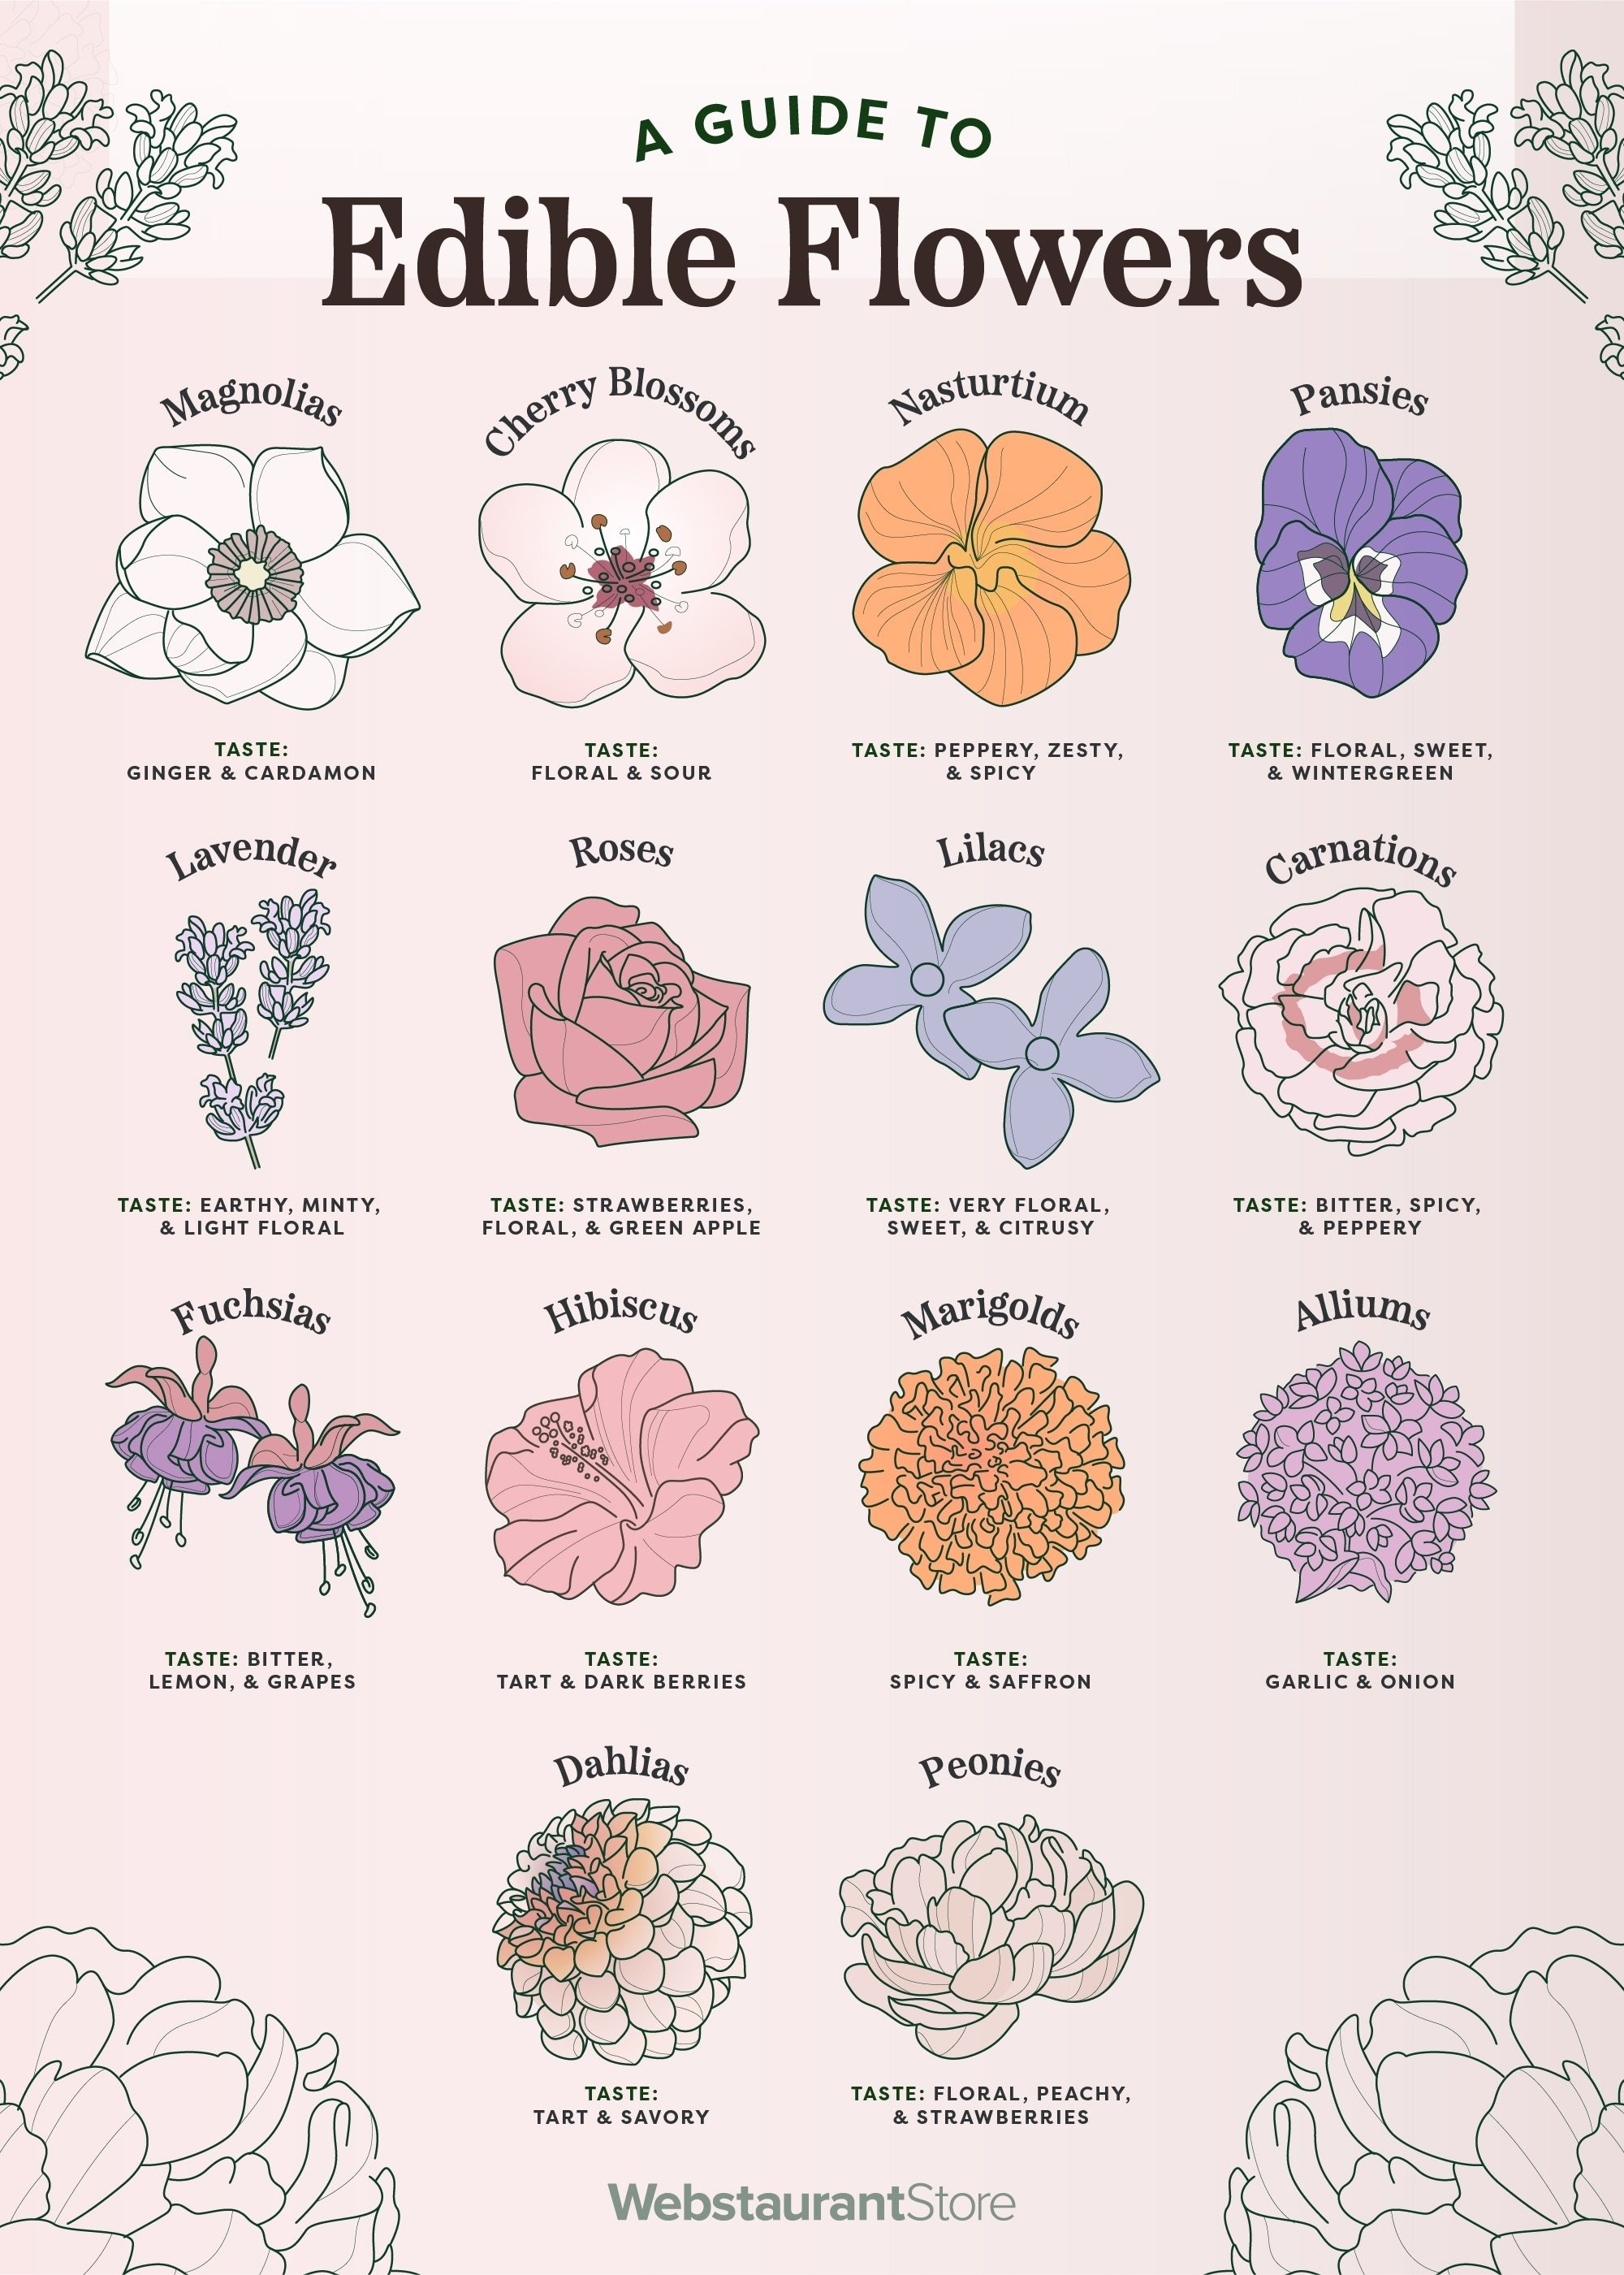 Edible Flowers Infographic